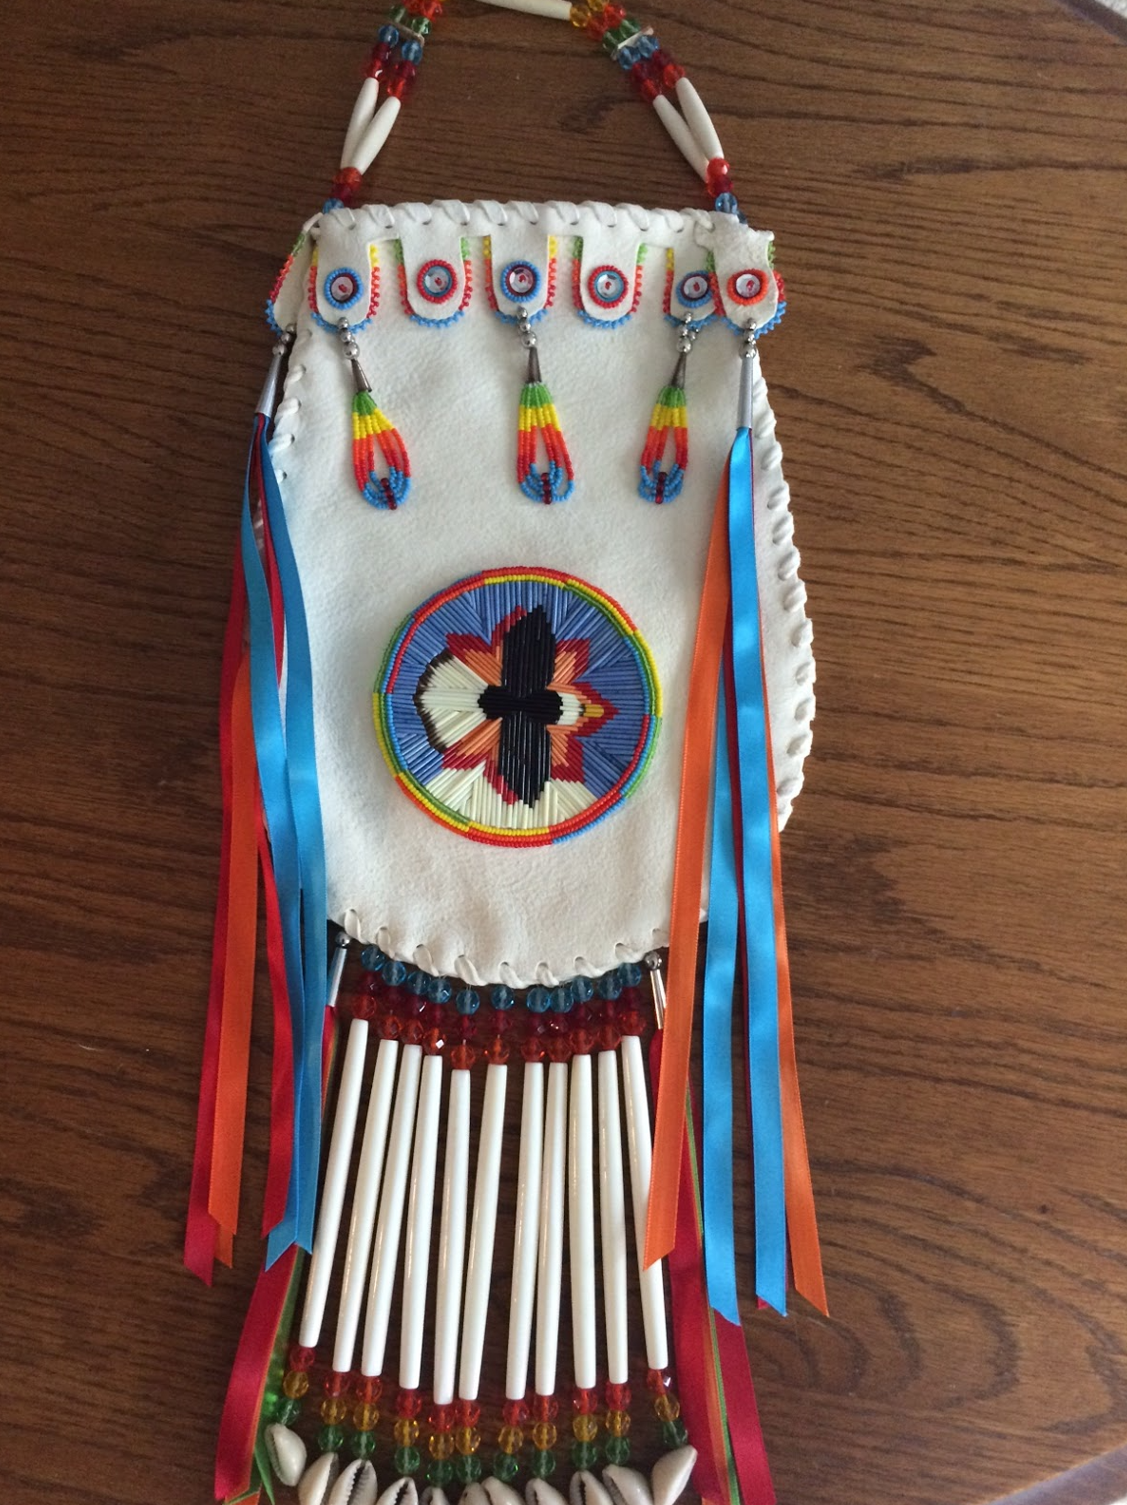 A purse made of white leather decorated in indigenous style with an eagle centerpiece.